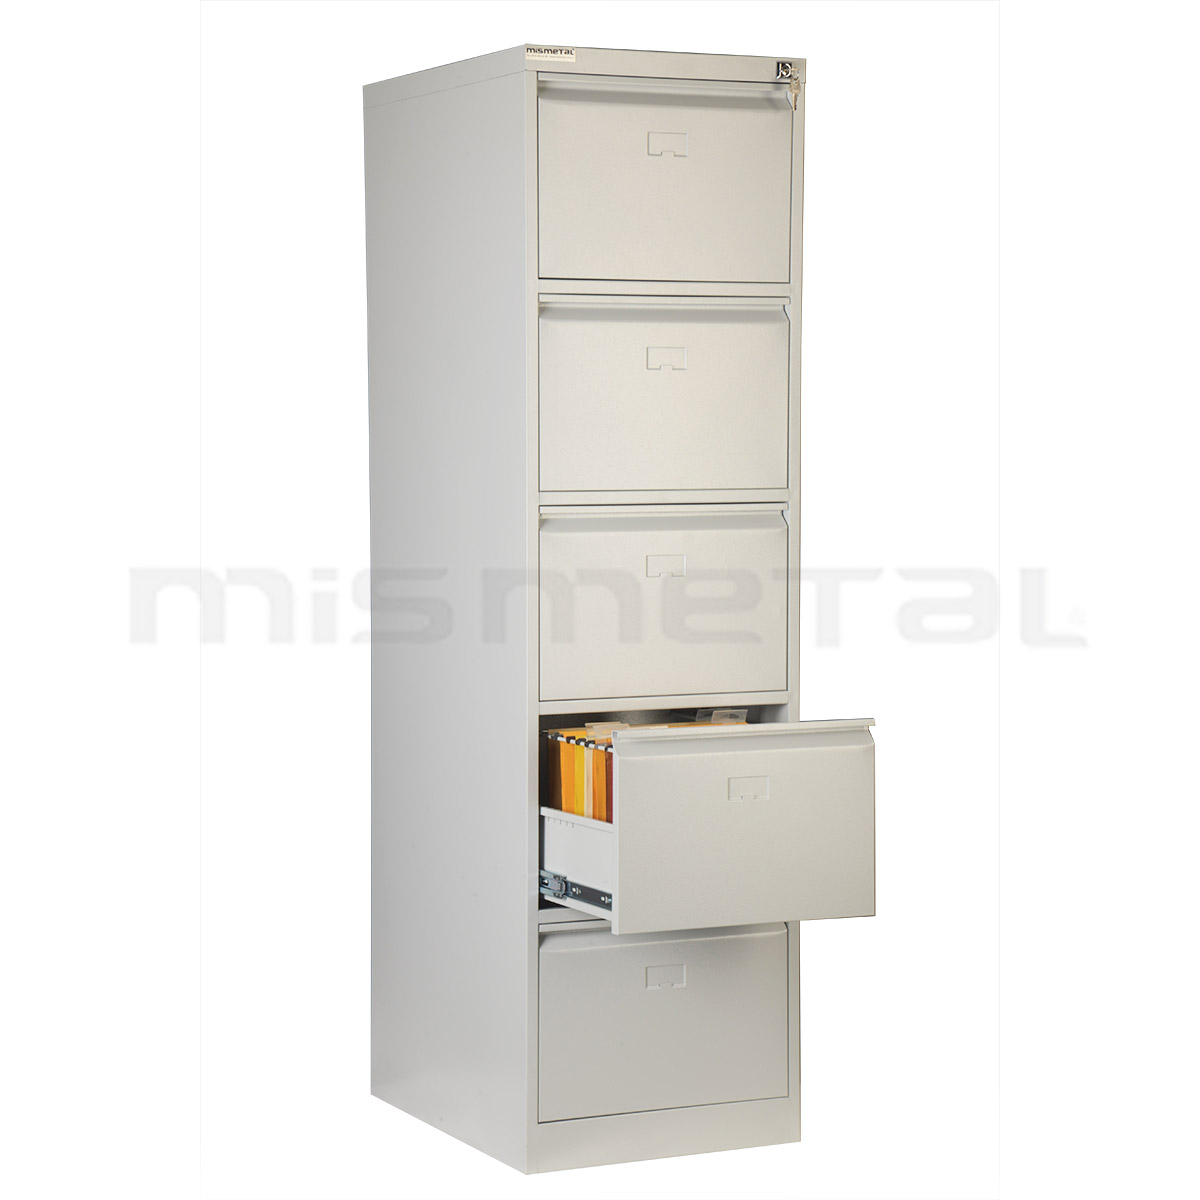 5 Drawers Telescopic Rail Card Index Cabinet